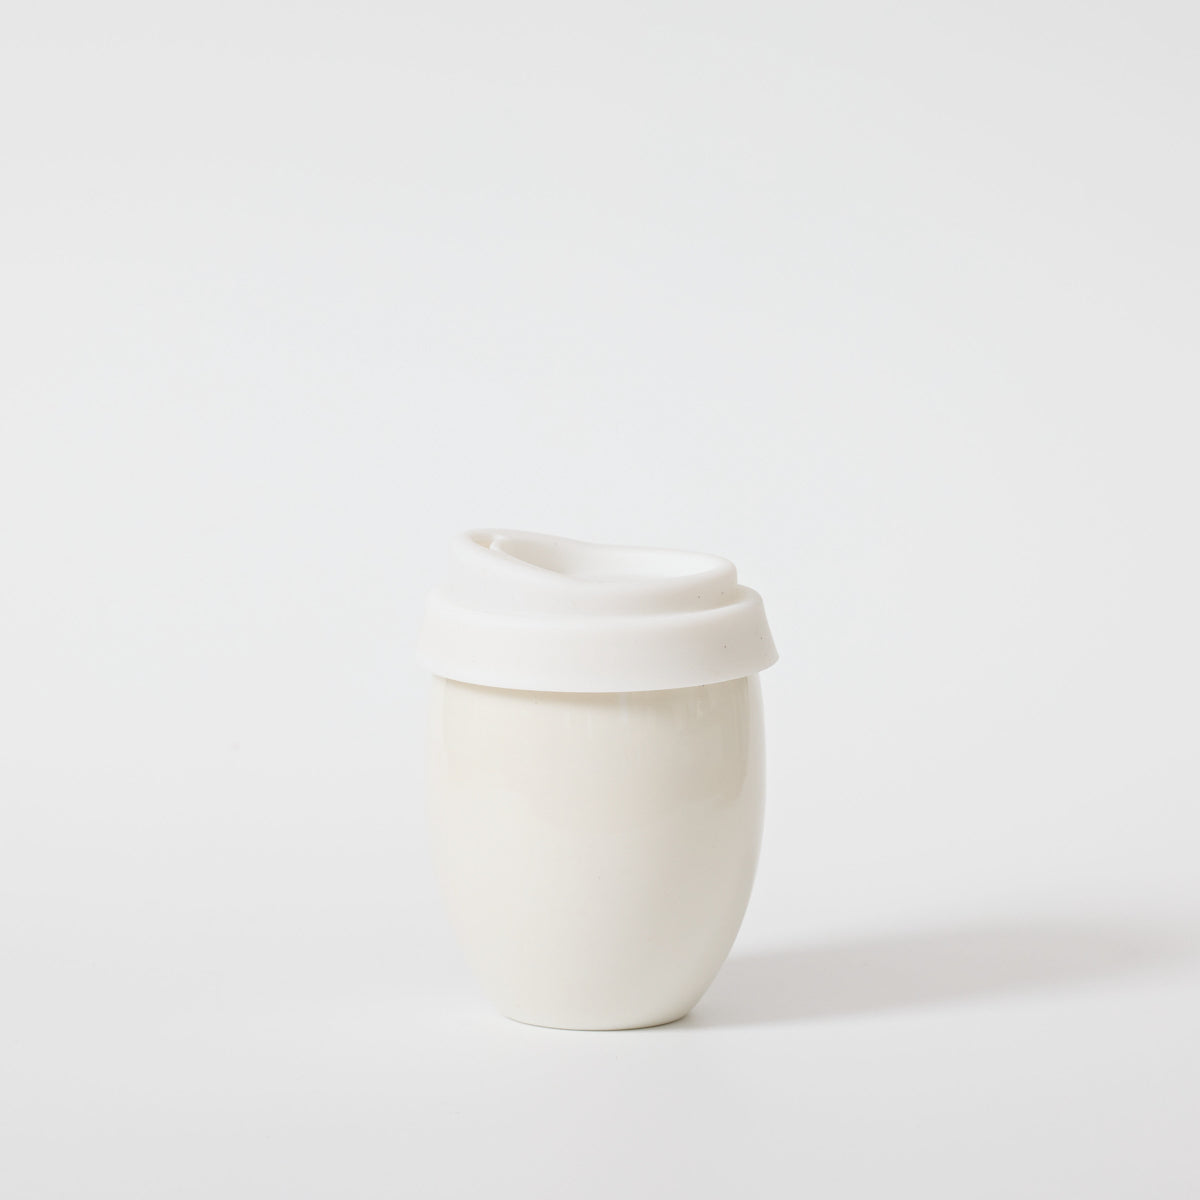 Personalise Your Ceramic Keep Cup